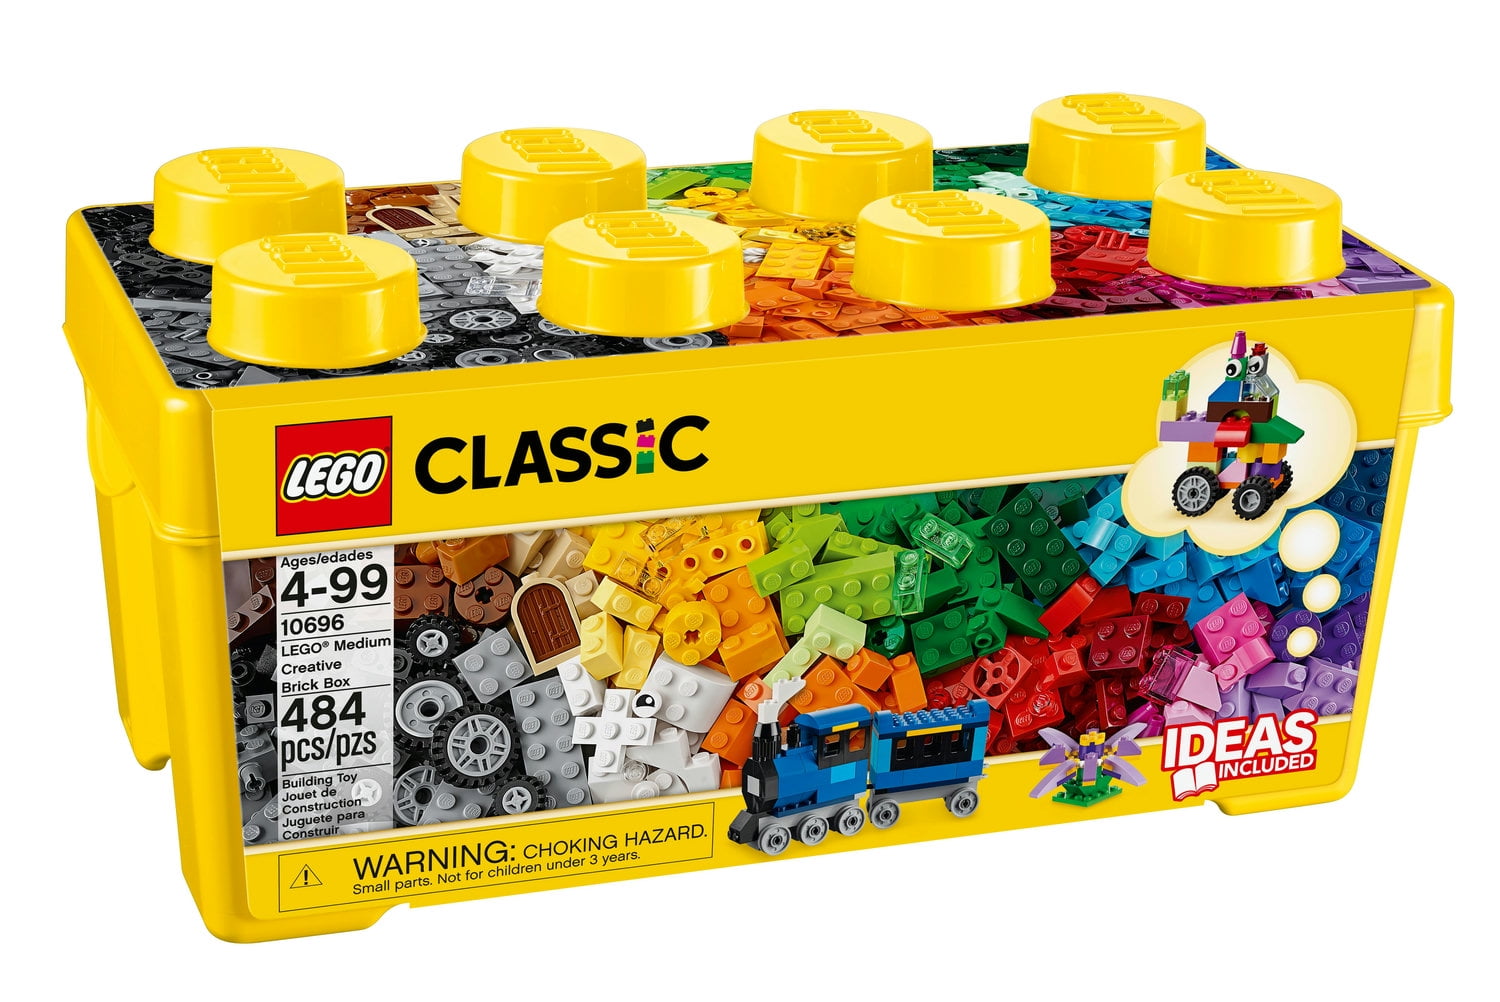 My Girls Brick Sets 12 Designs Toys Games Children Gift Lego Compatible Yellow Car for sale online 